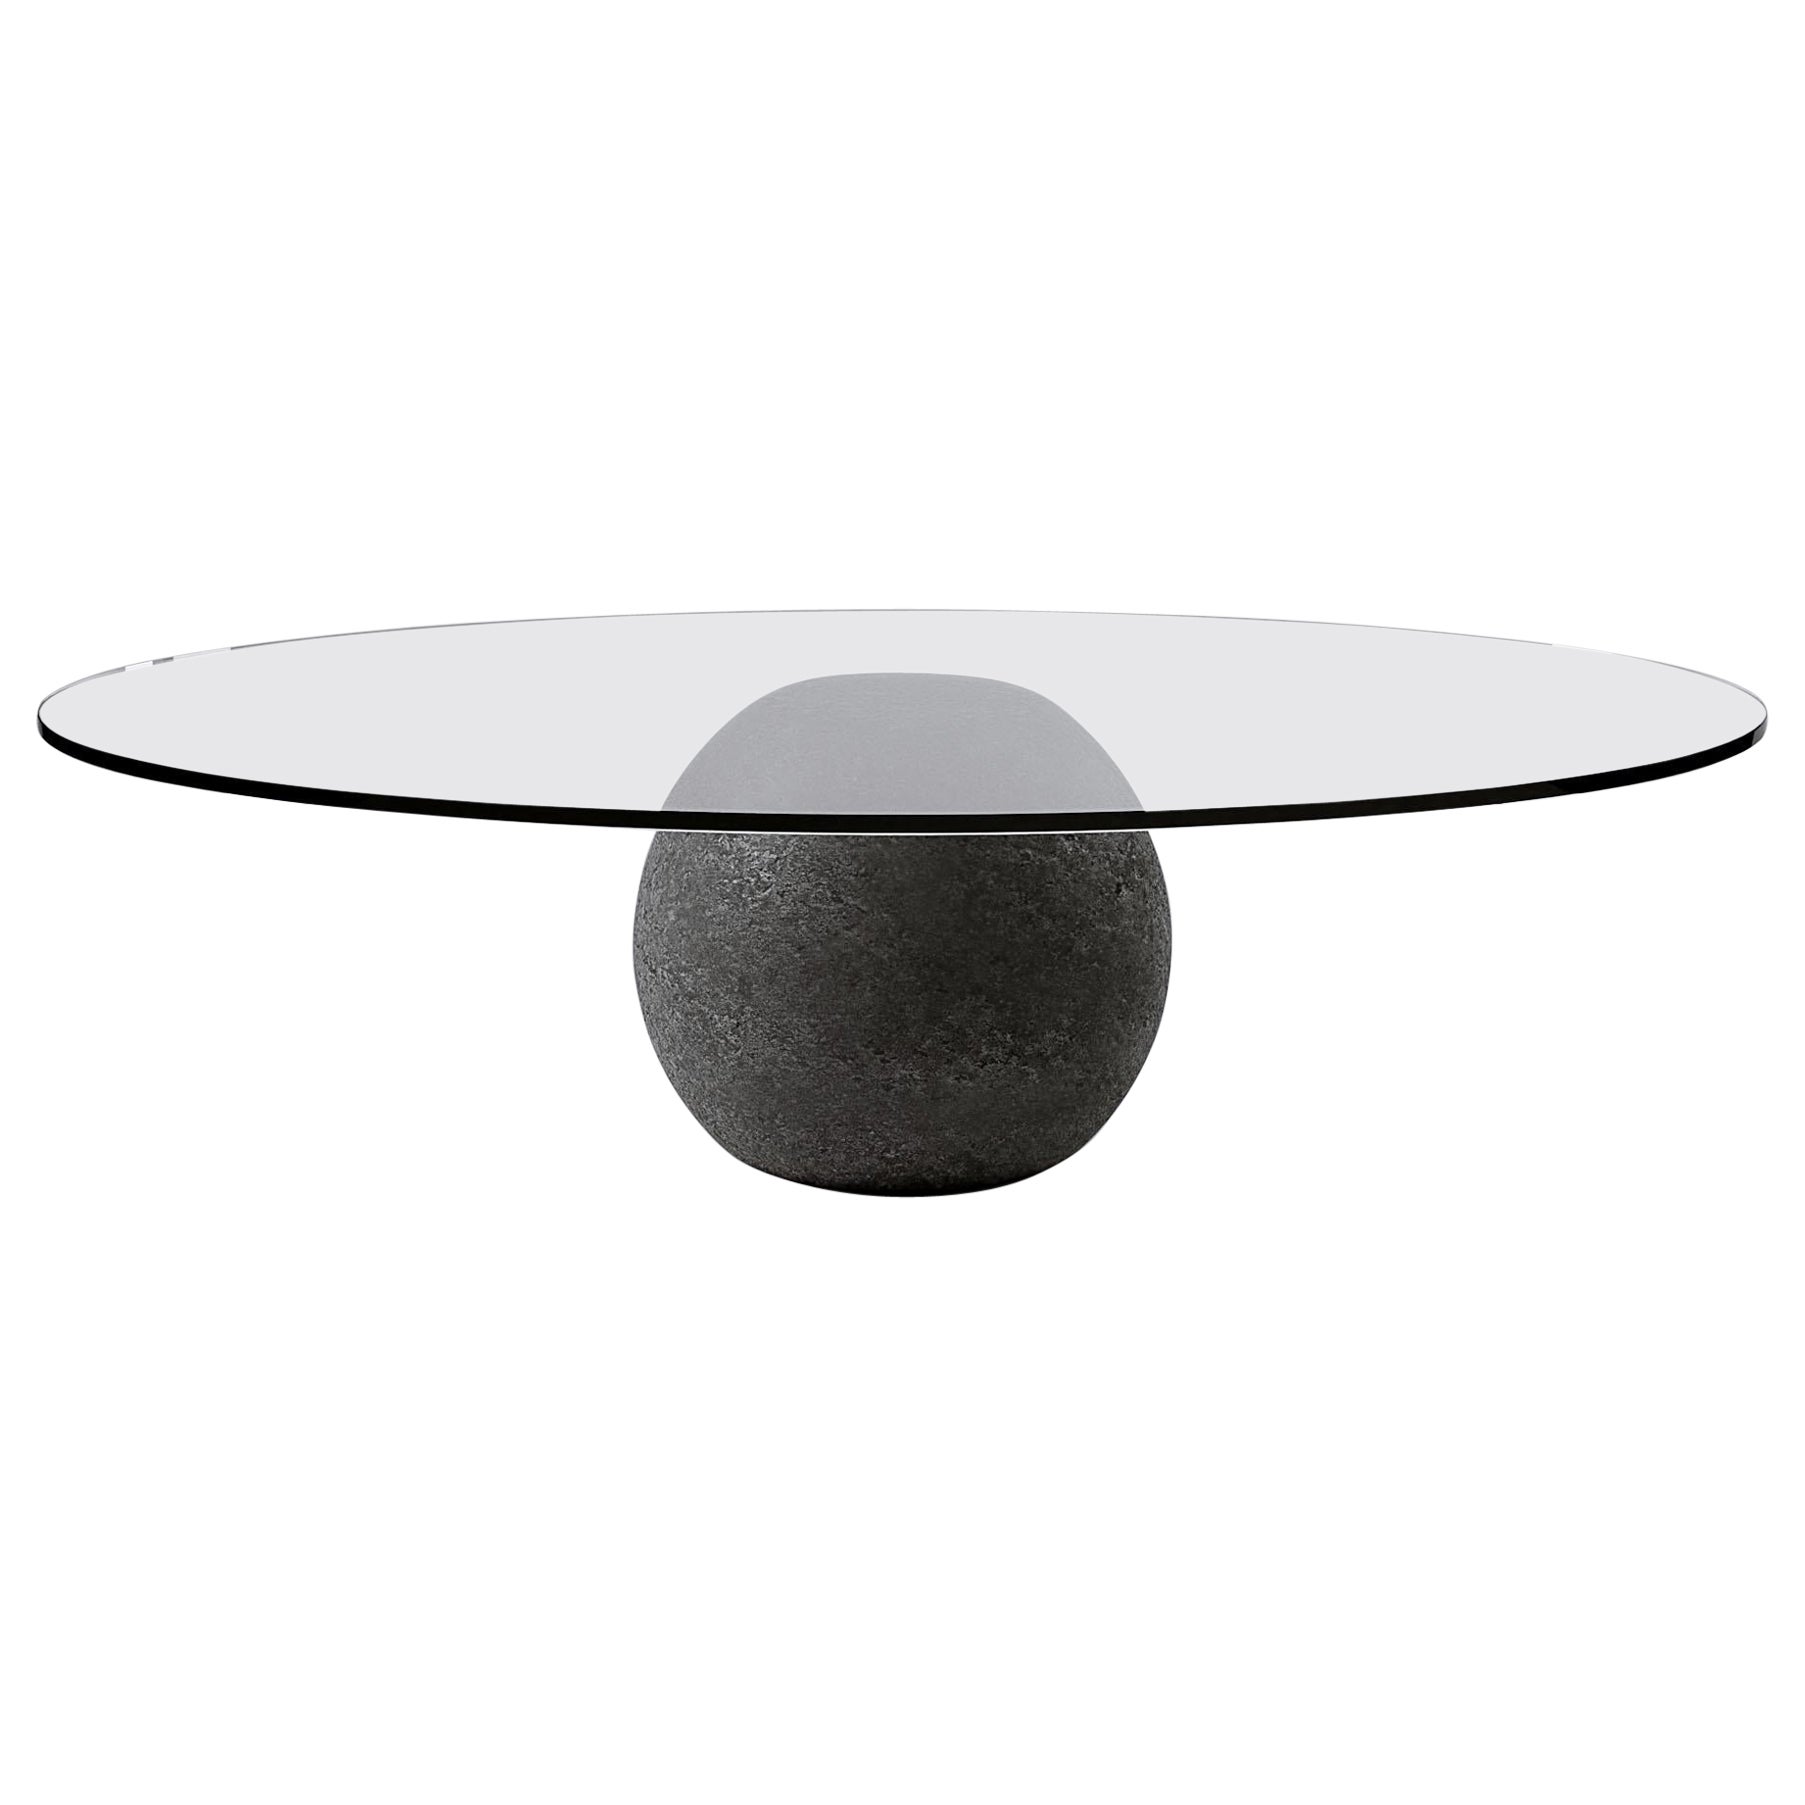 Volcanic stone and glass coffee table For Sale